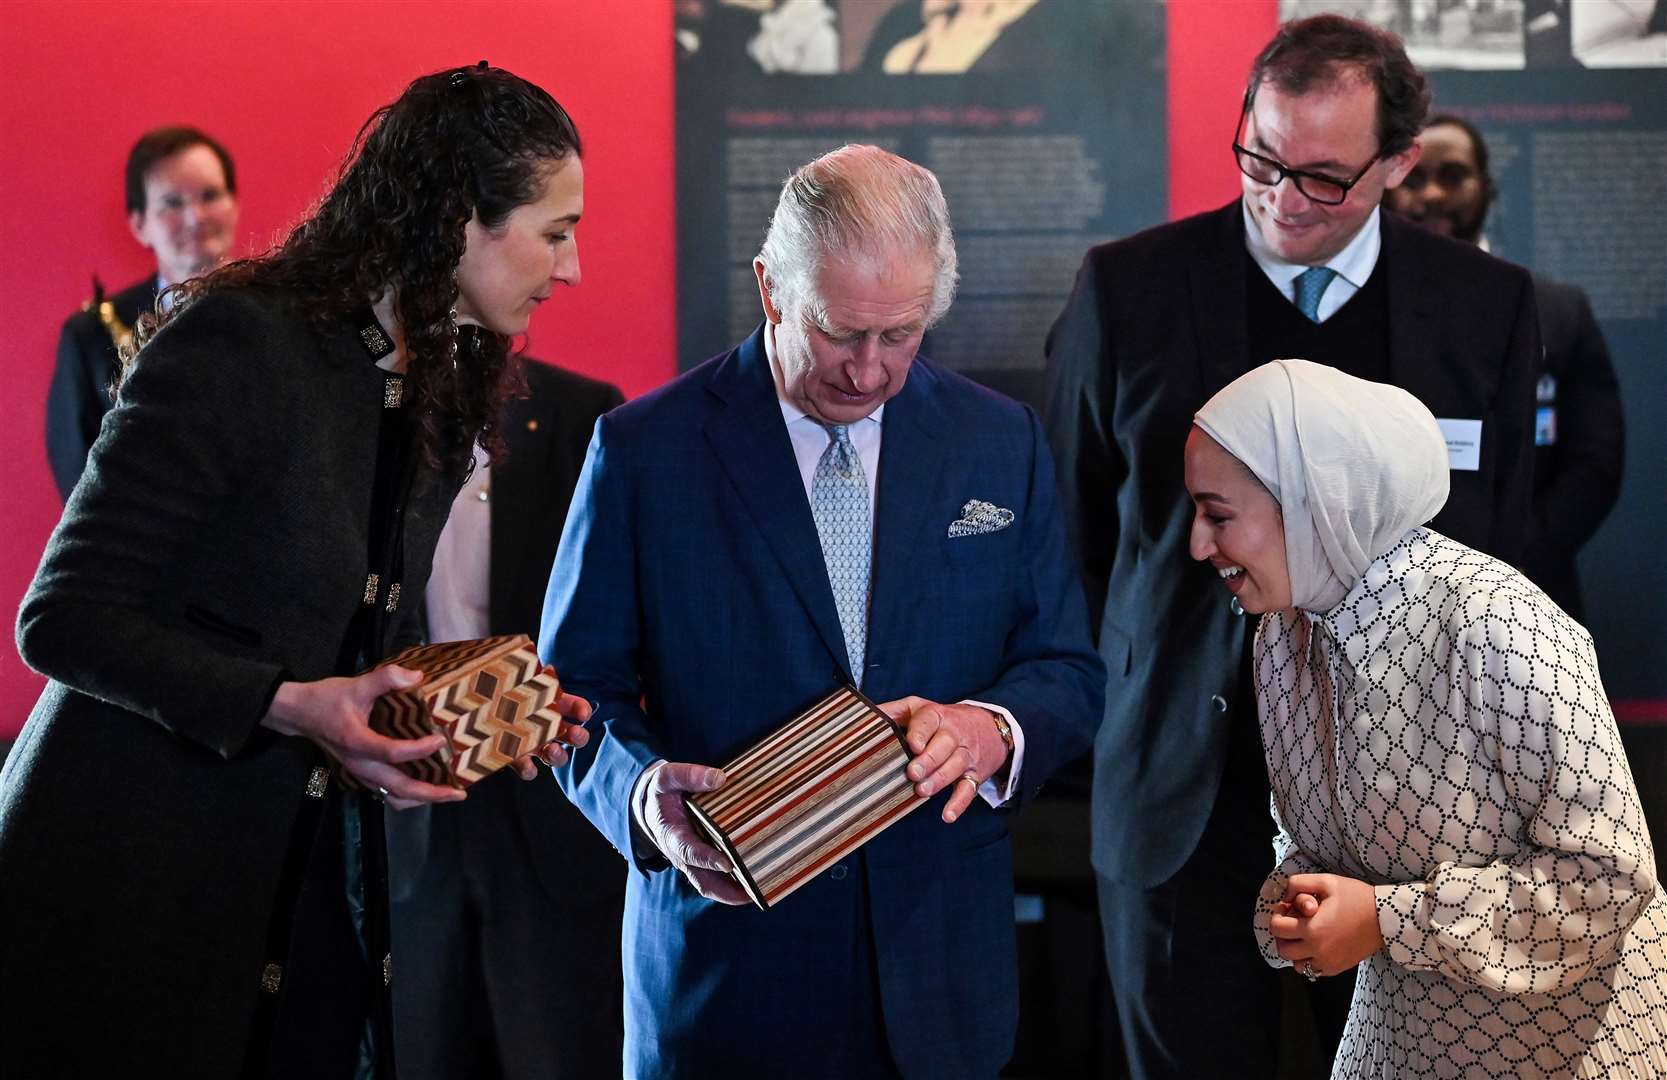 The King attempts to open a puzzle box made in Jordan during a visit to the newly renovated Leighton House museum in London (Justin Tallis/PA)